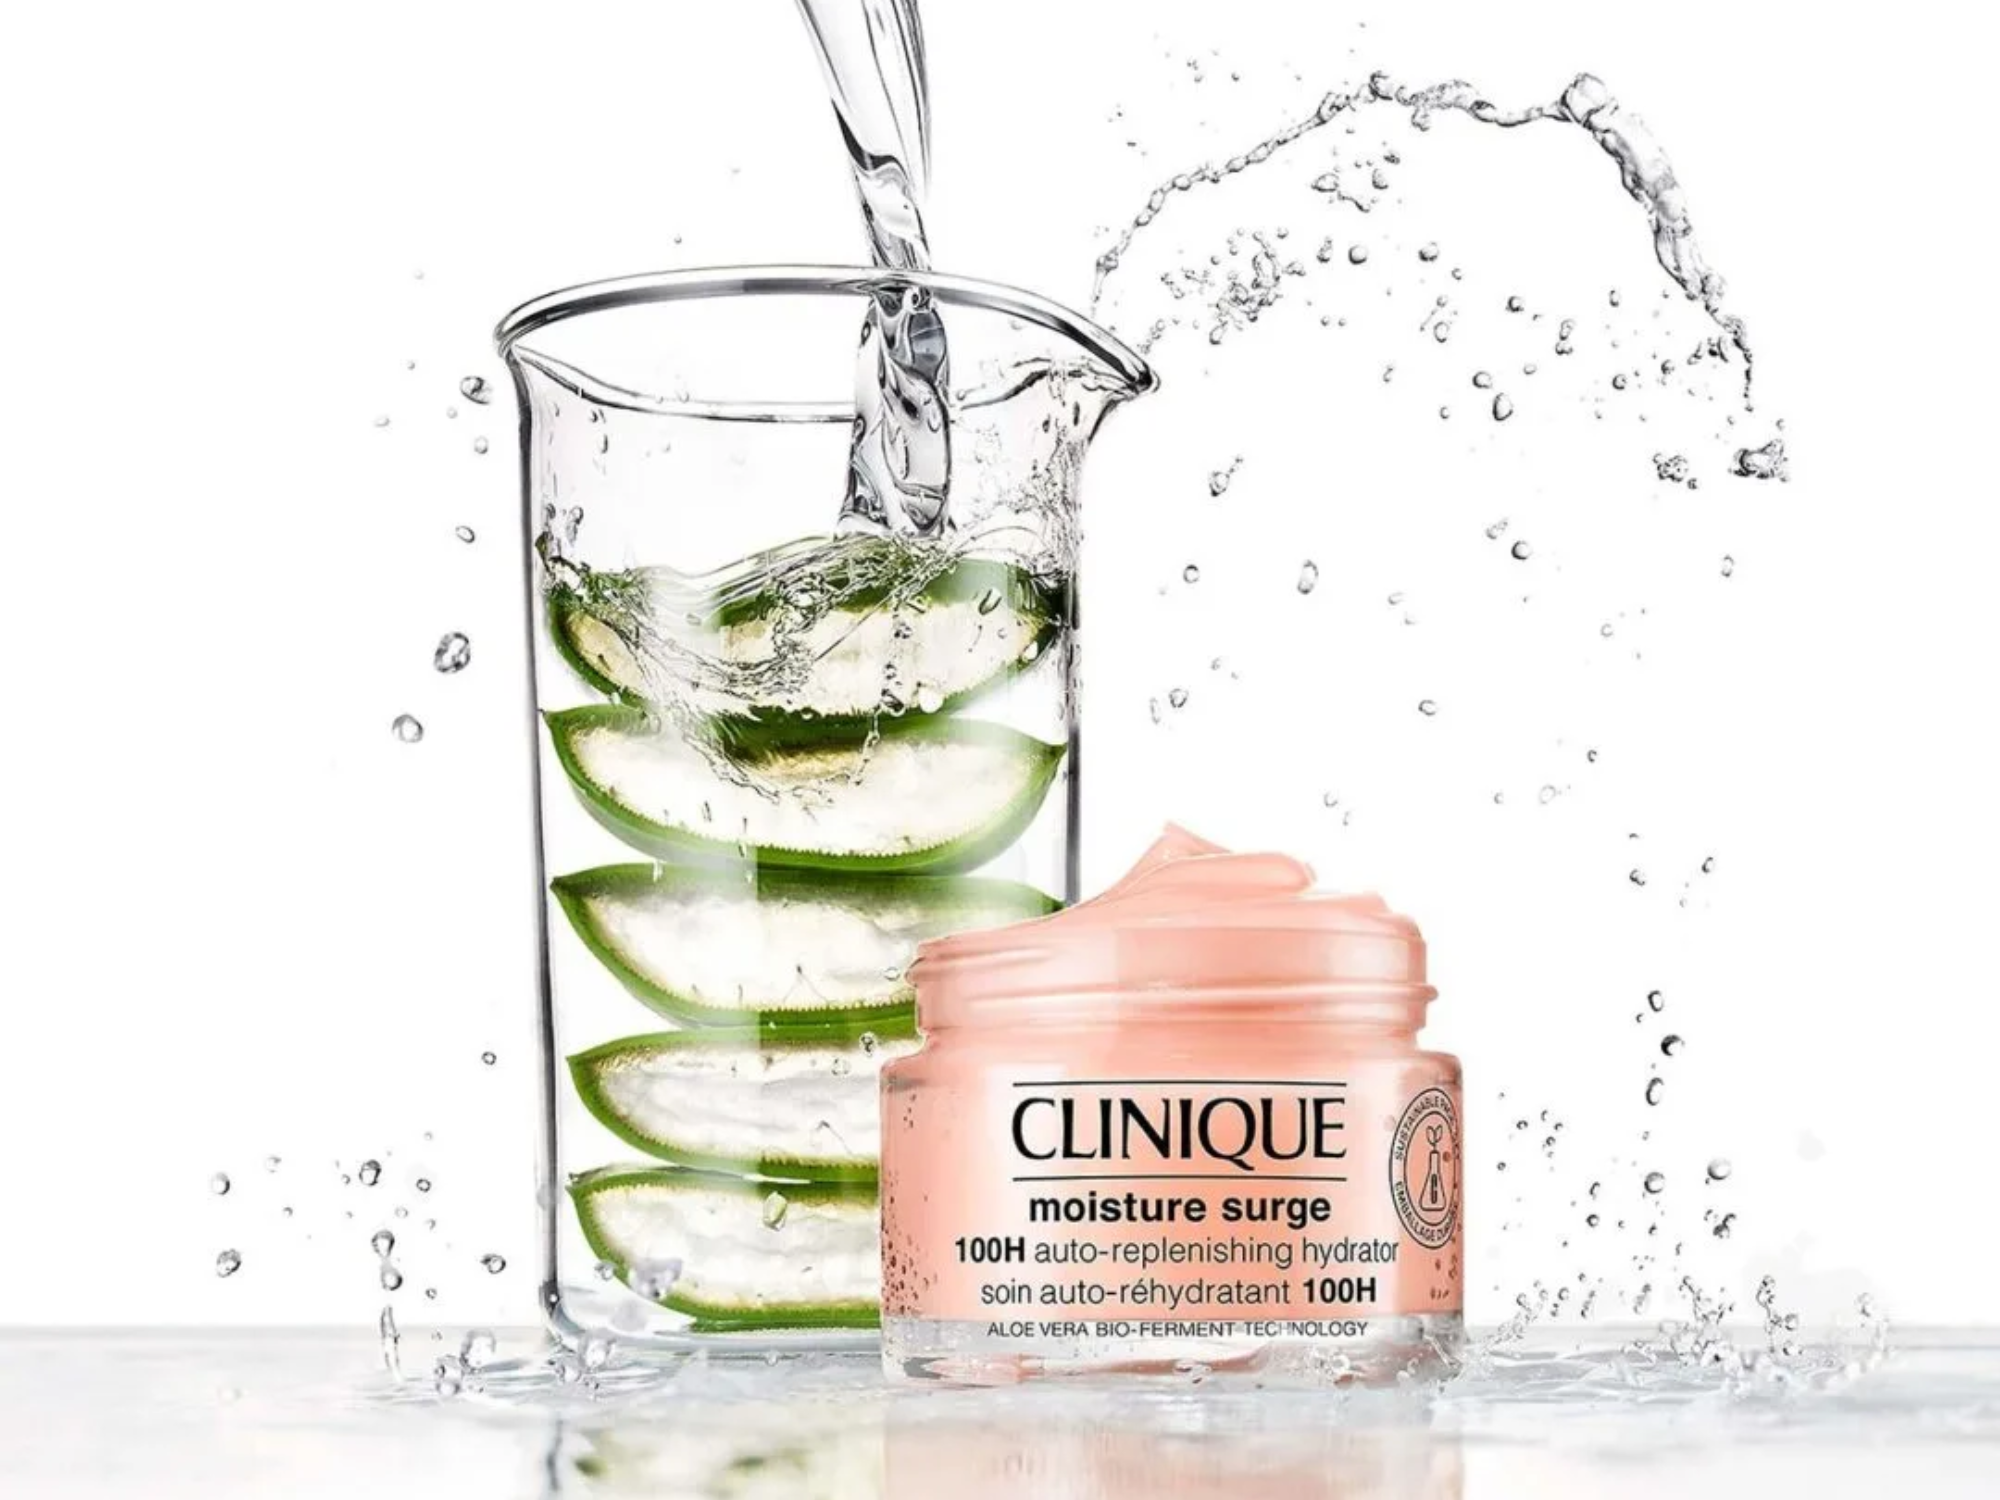 81% of Clinique sample recipients are likely to purchase